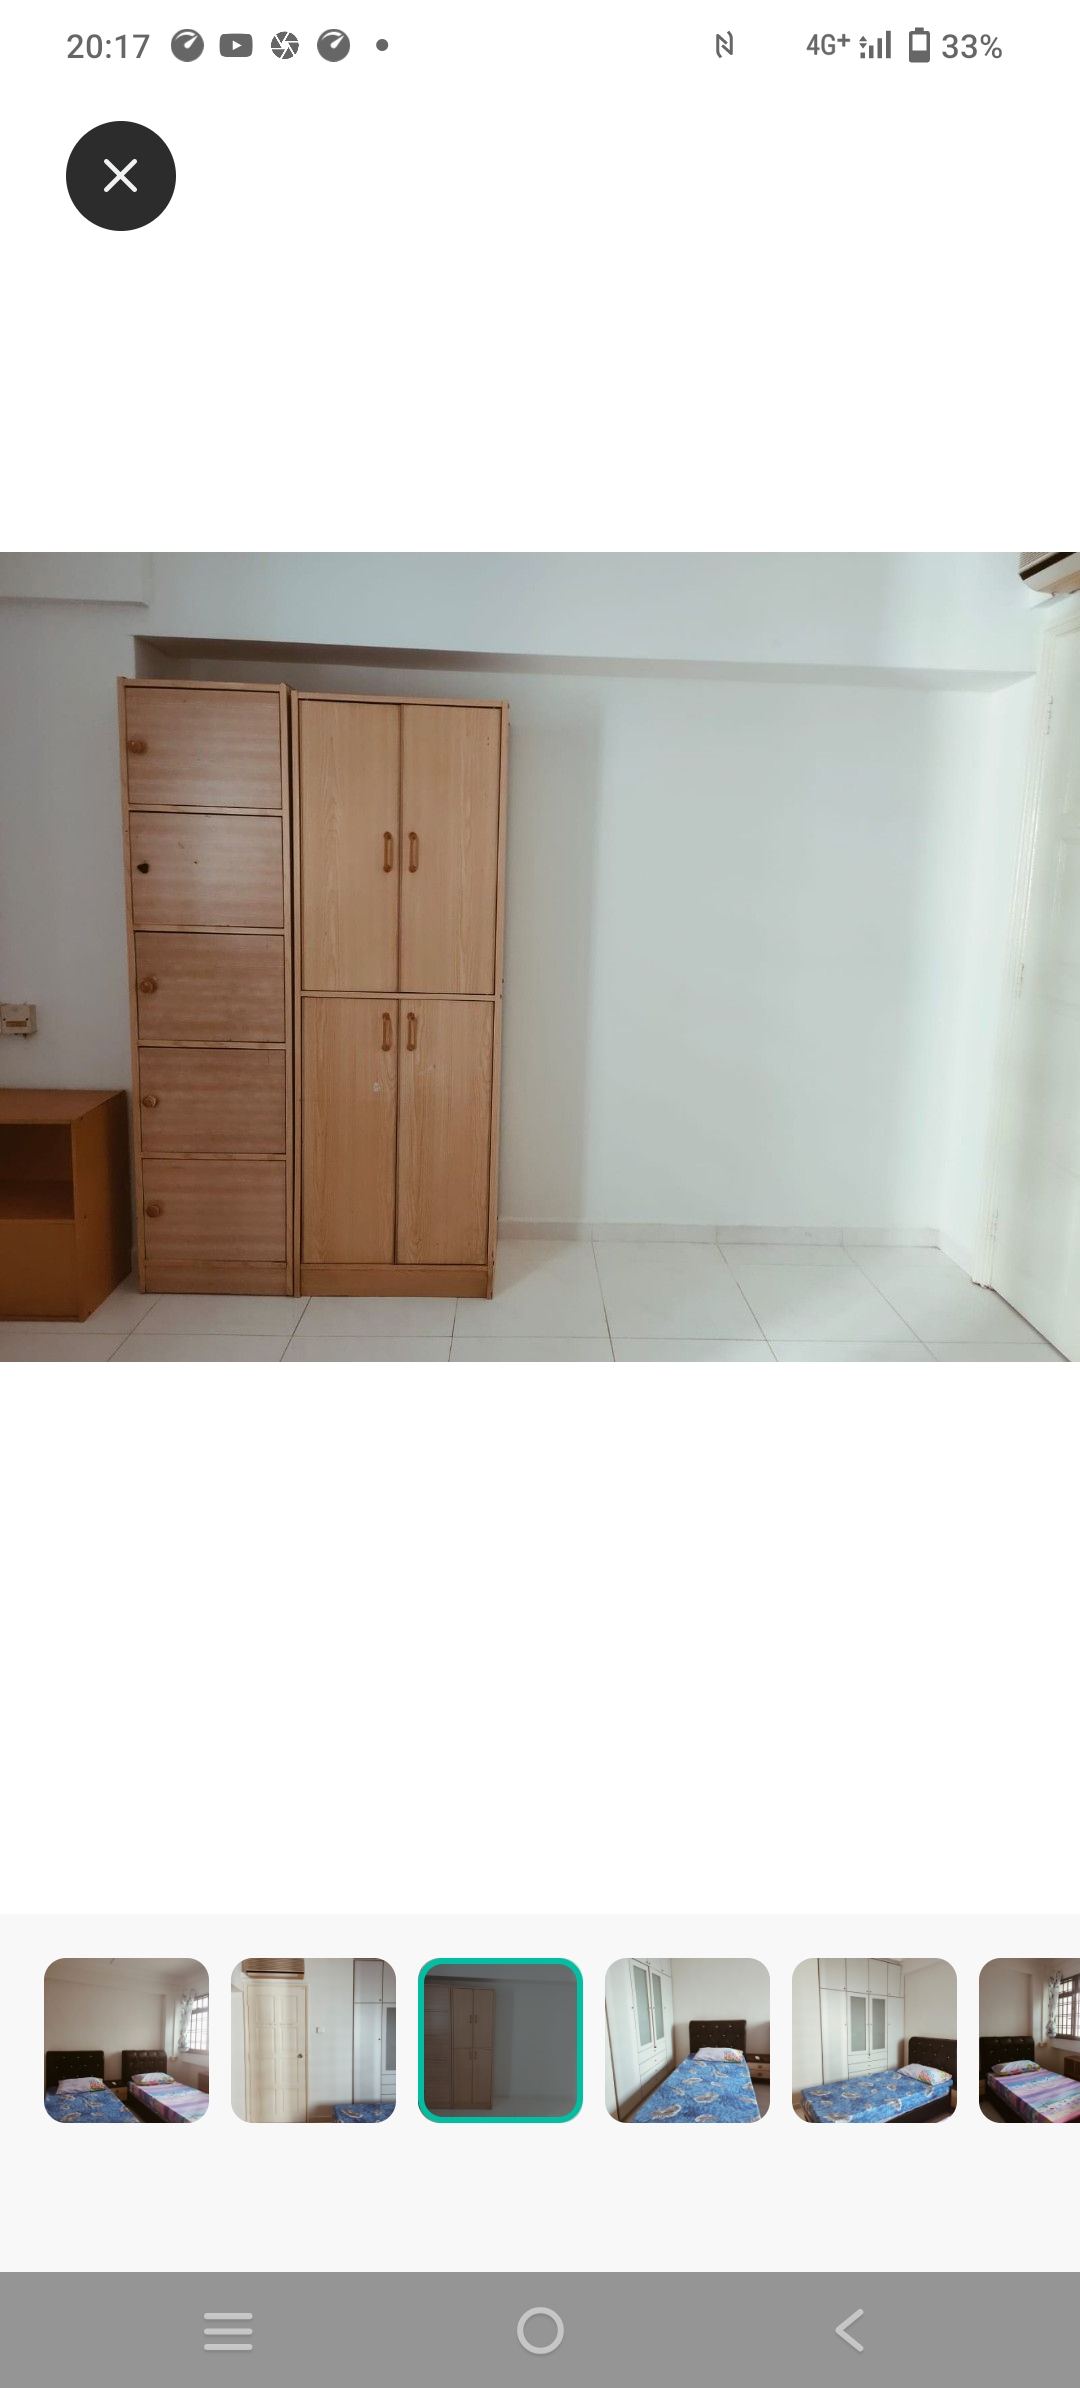 HDB For Rent, Hdb Room For Rental, D04:, 1,200 SGD, 99-year, Floor